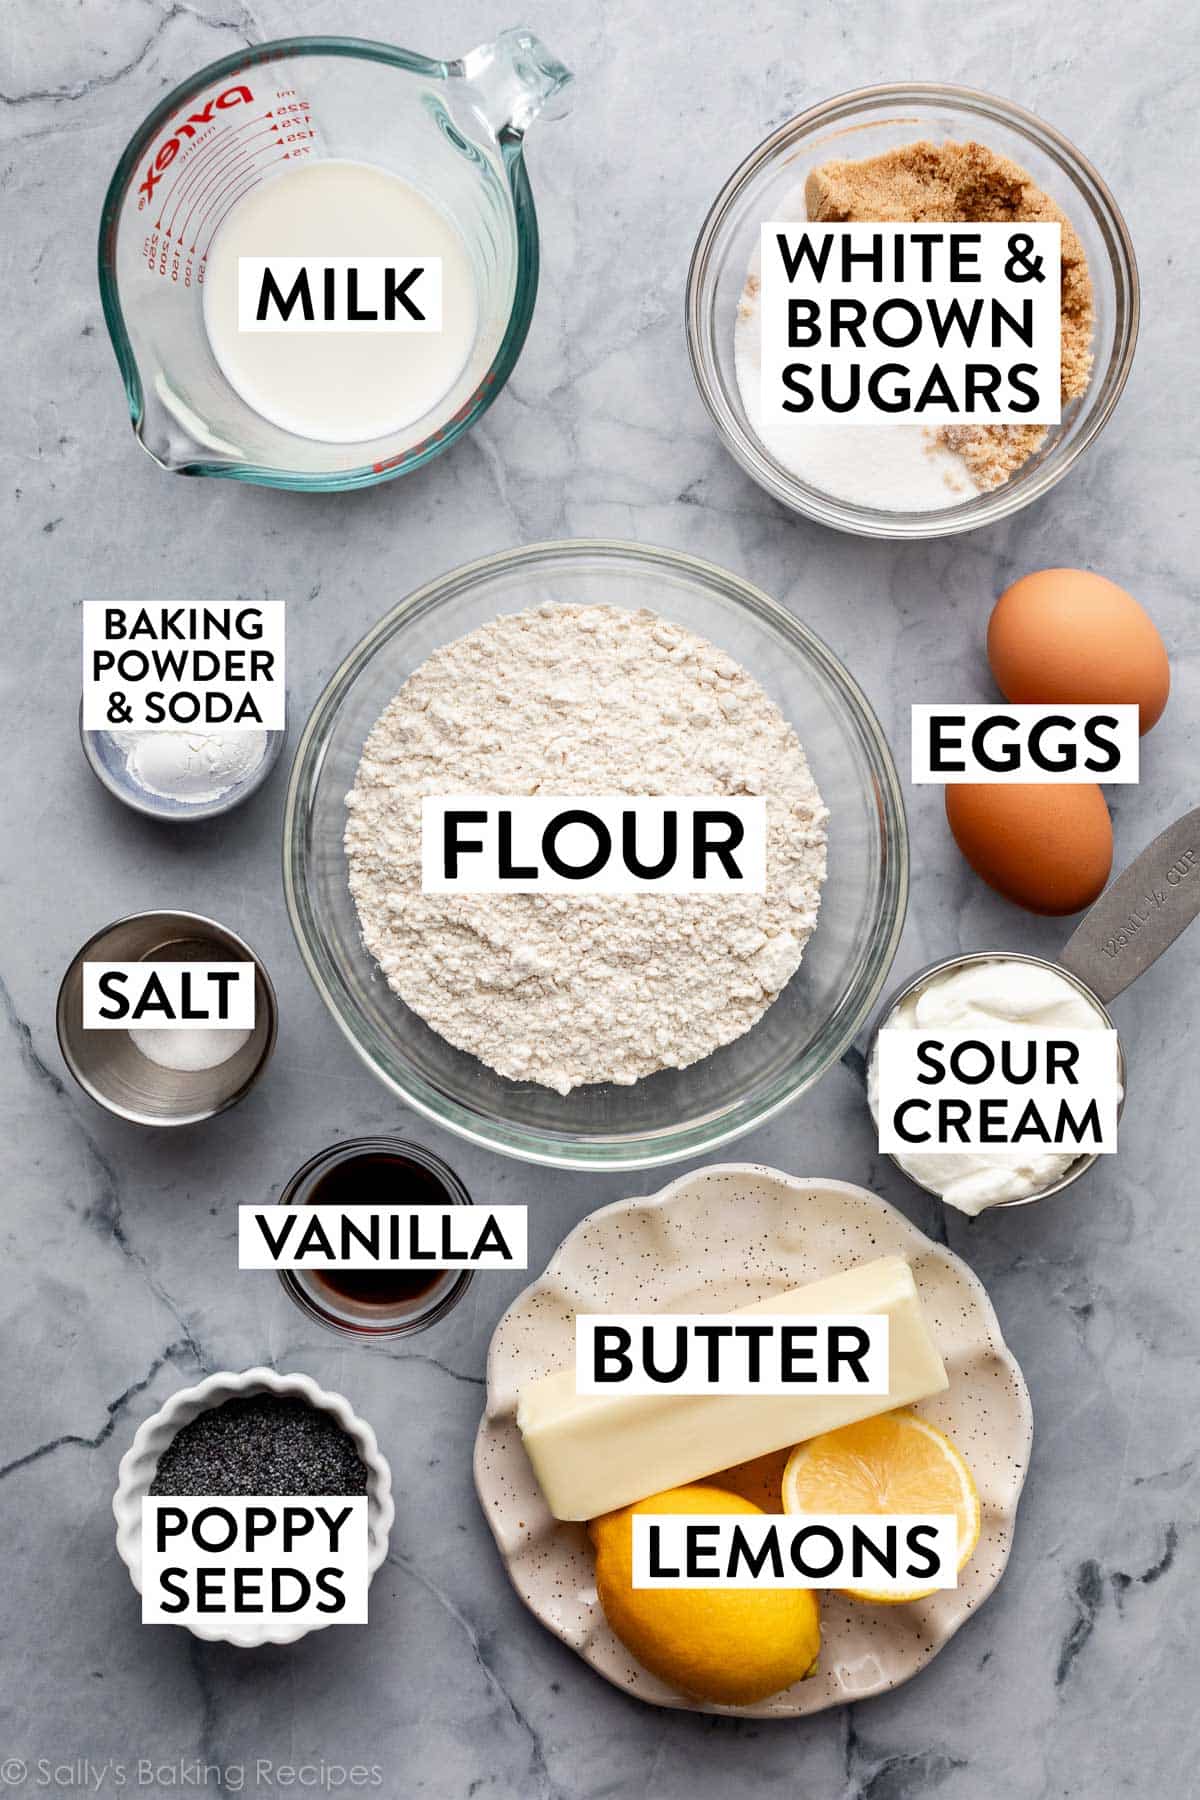 ingredients on marble counter including eggs, butter, flour, sour cream, milk, and sugars.